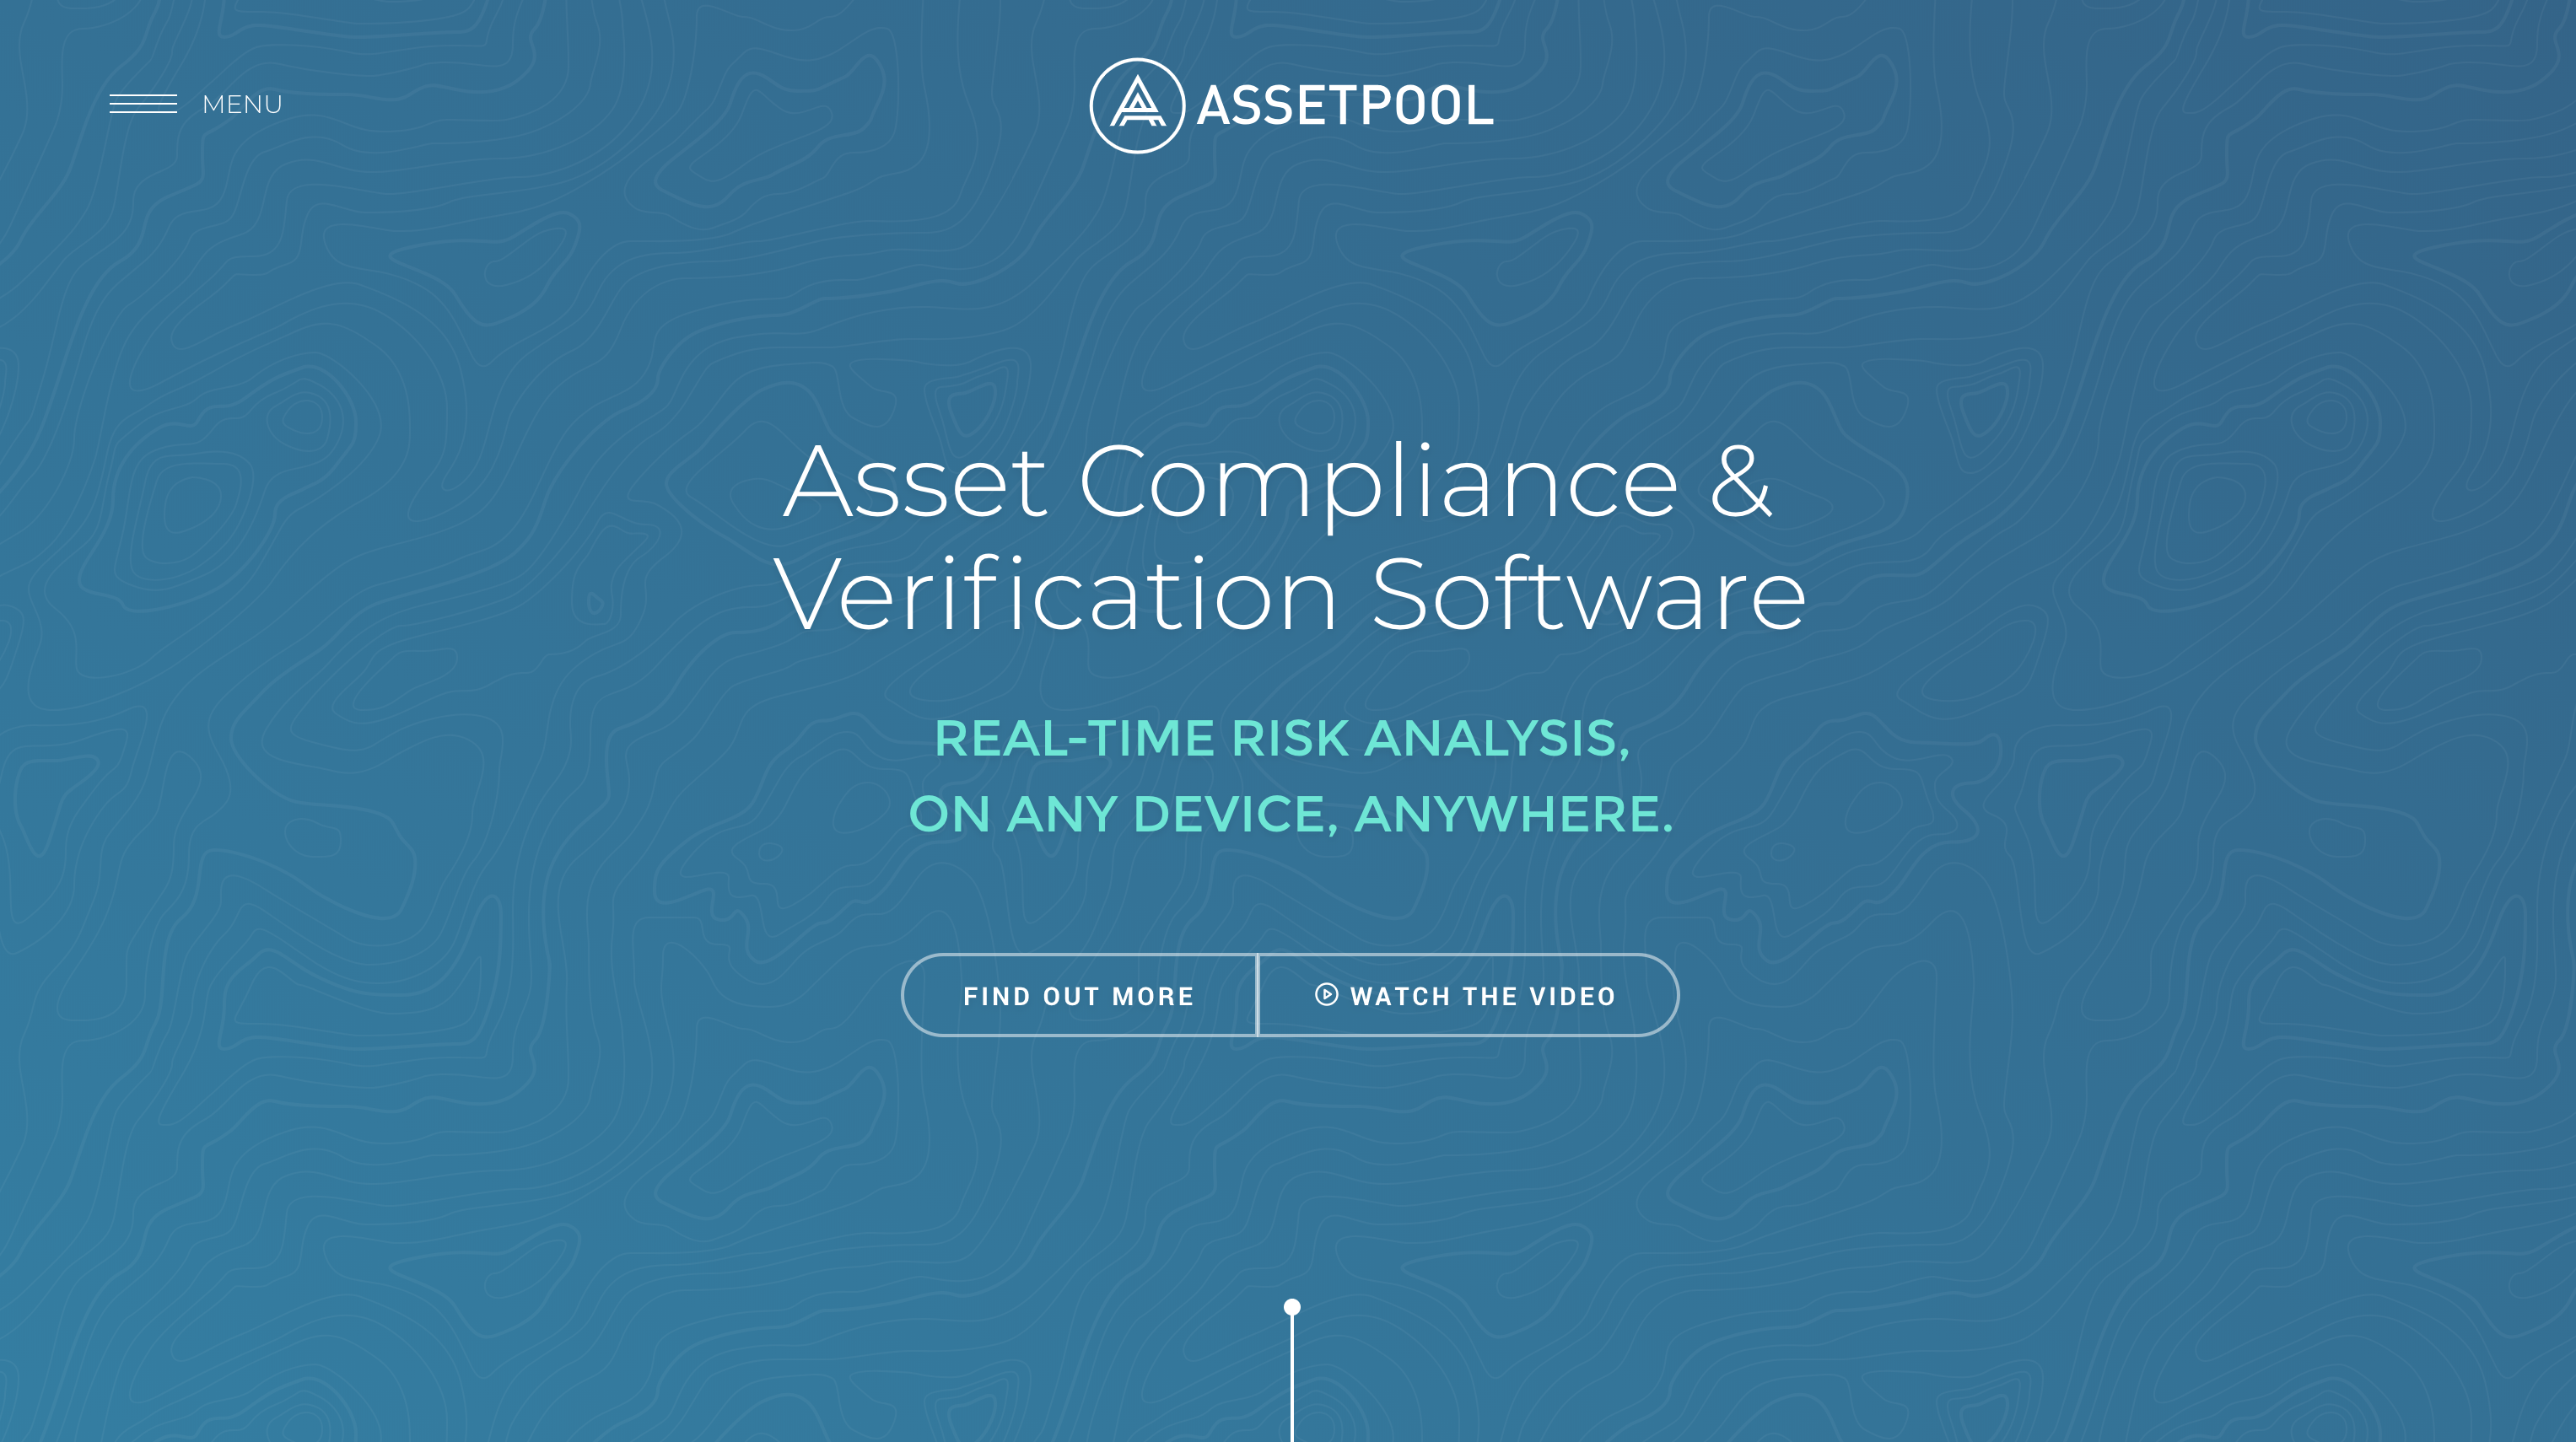 AssetPool.co Company Overview Page